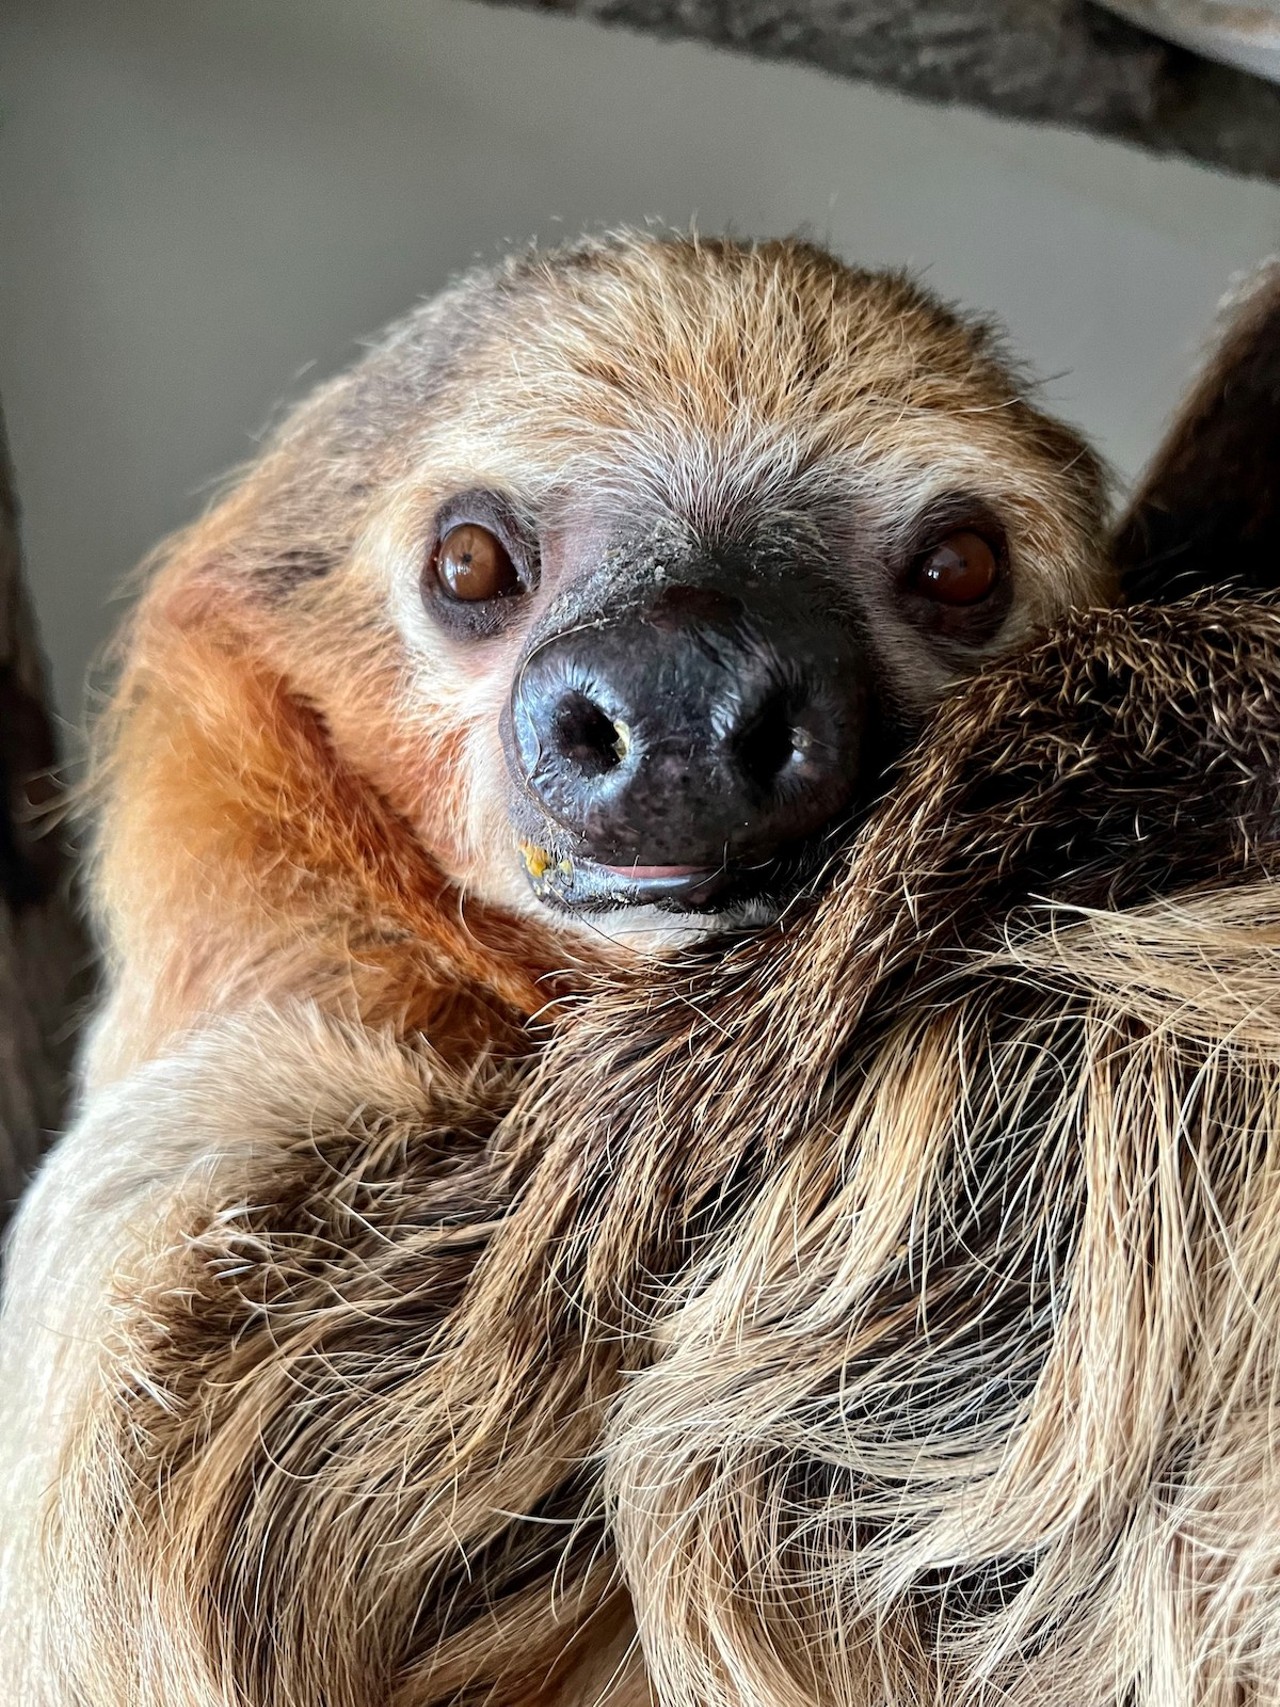 Lightning the sloth is pregnant and is expecting her baby sometime this summer.